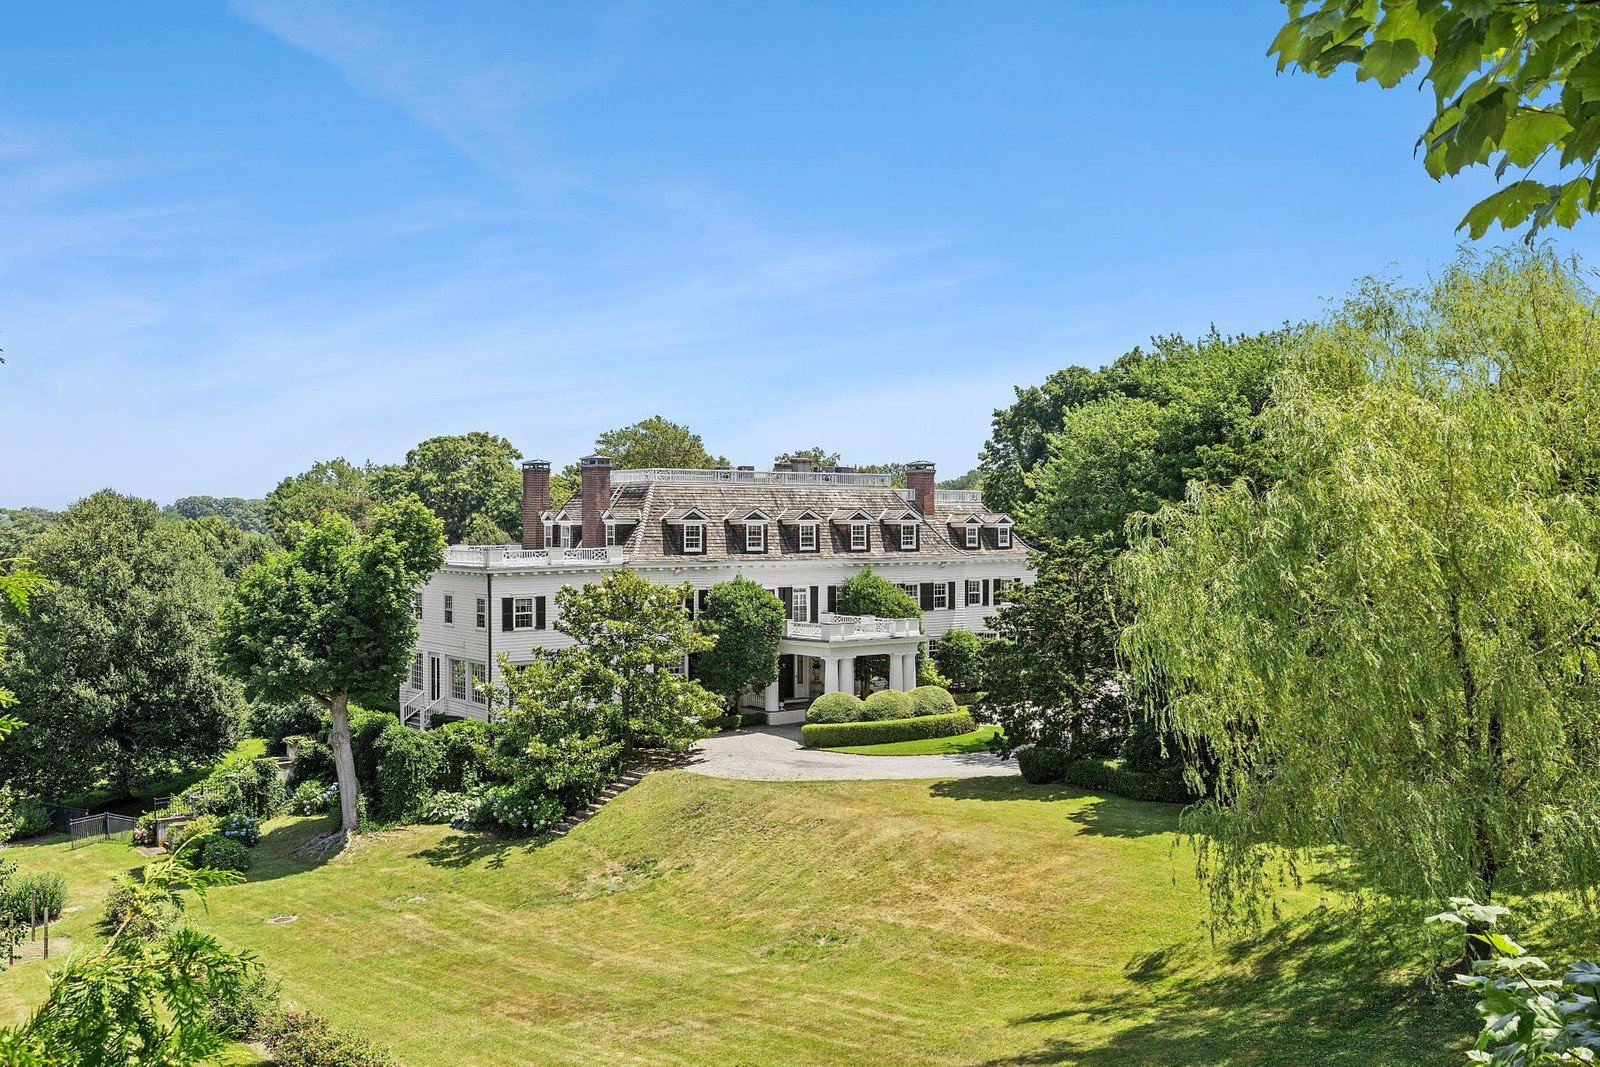 Francis York Daniel Gale Sothebys The Lindens Timeless Long Island Estate Once Home to the Famed Bootleggers, the Vanderbilts, and Rockstars 24.jpeg